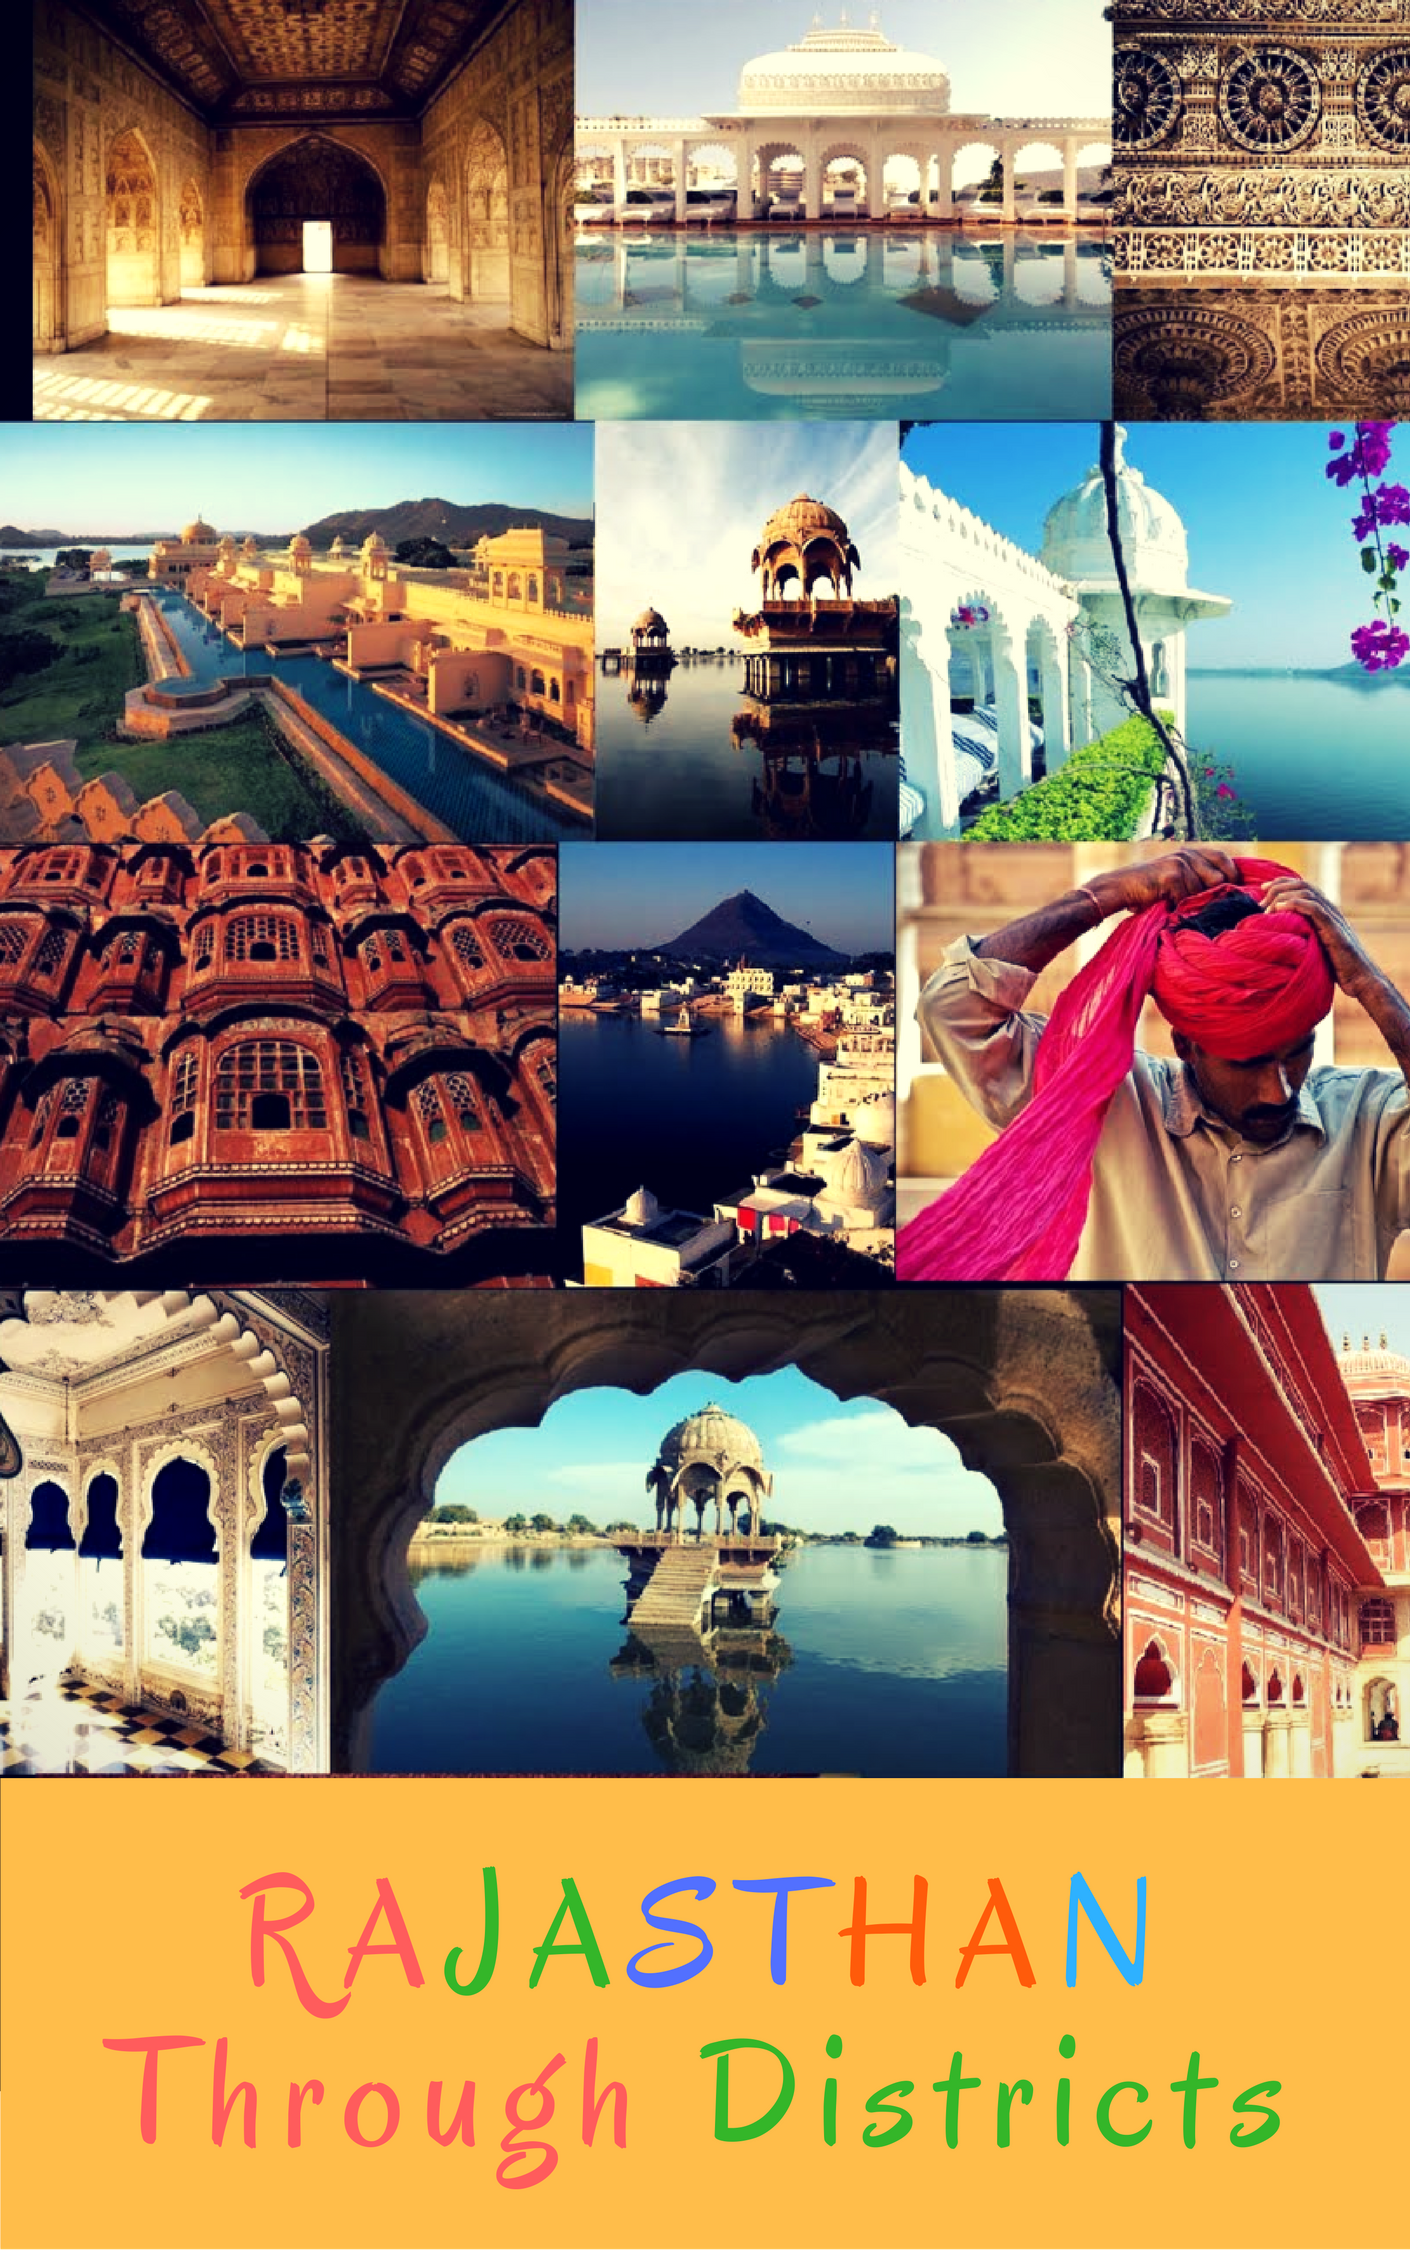 Rajasthan Through Districts - Cultural Montage Of Rajasthan - HD Wallpaper 